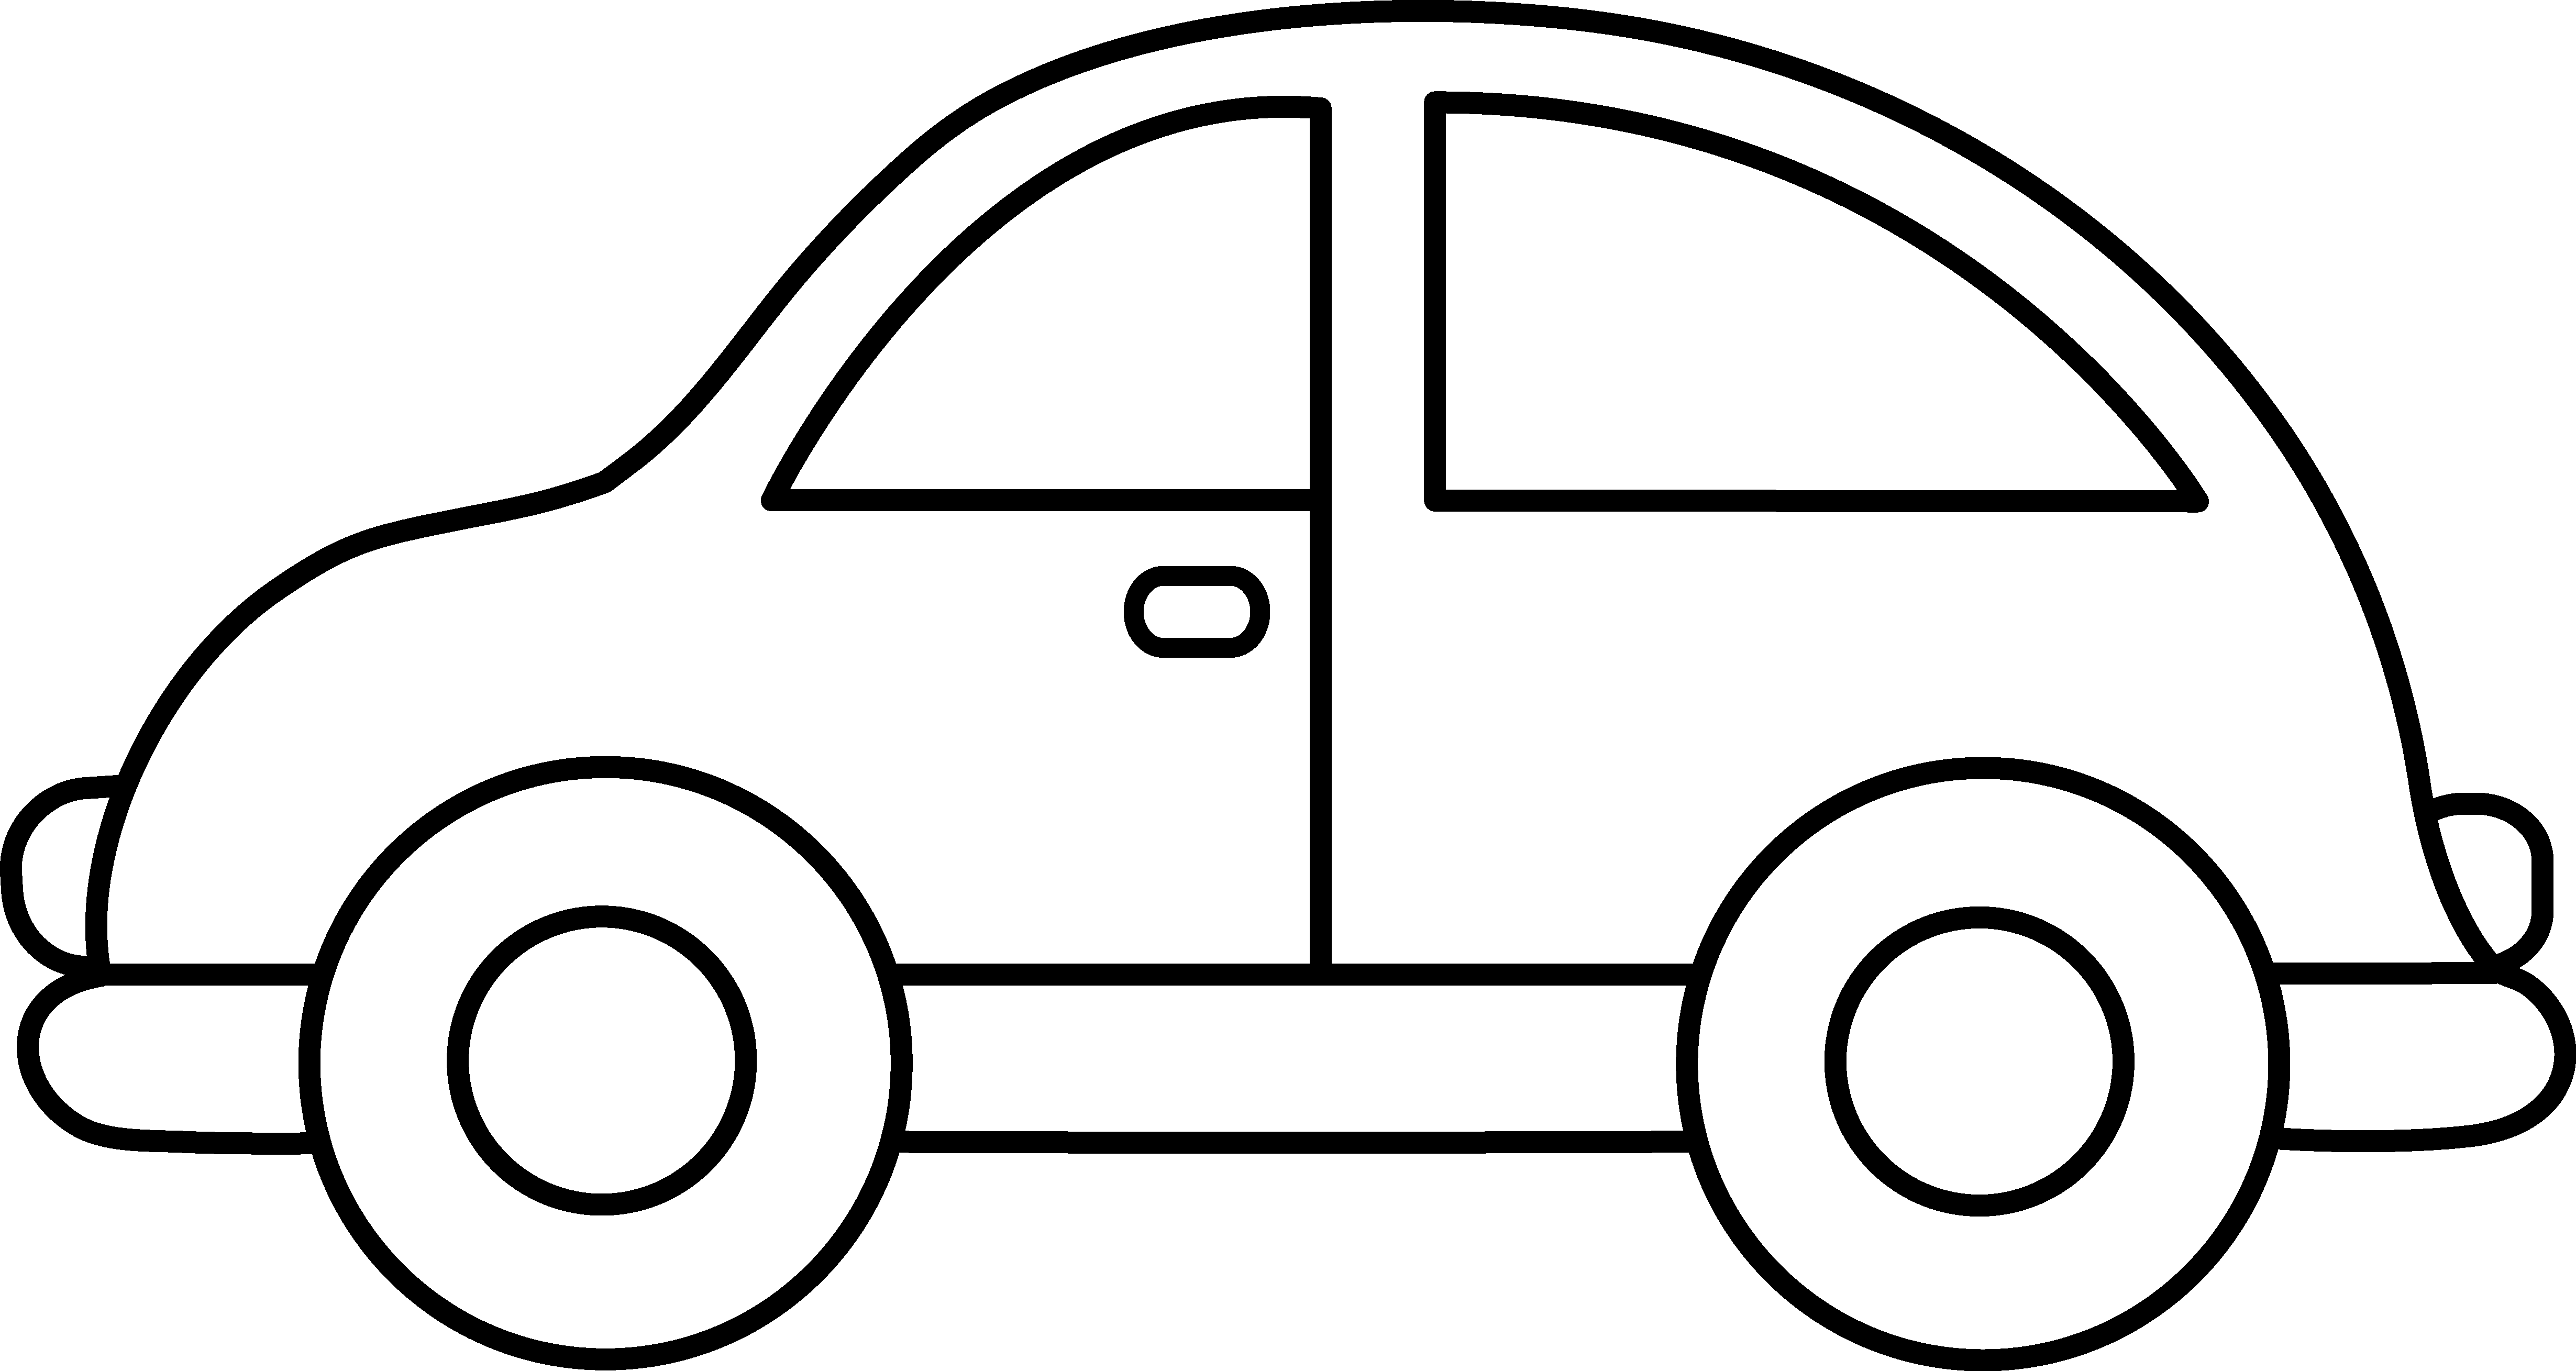 Color clipart toy. Car silhouette at getdrawings